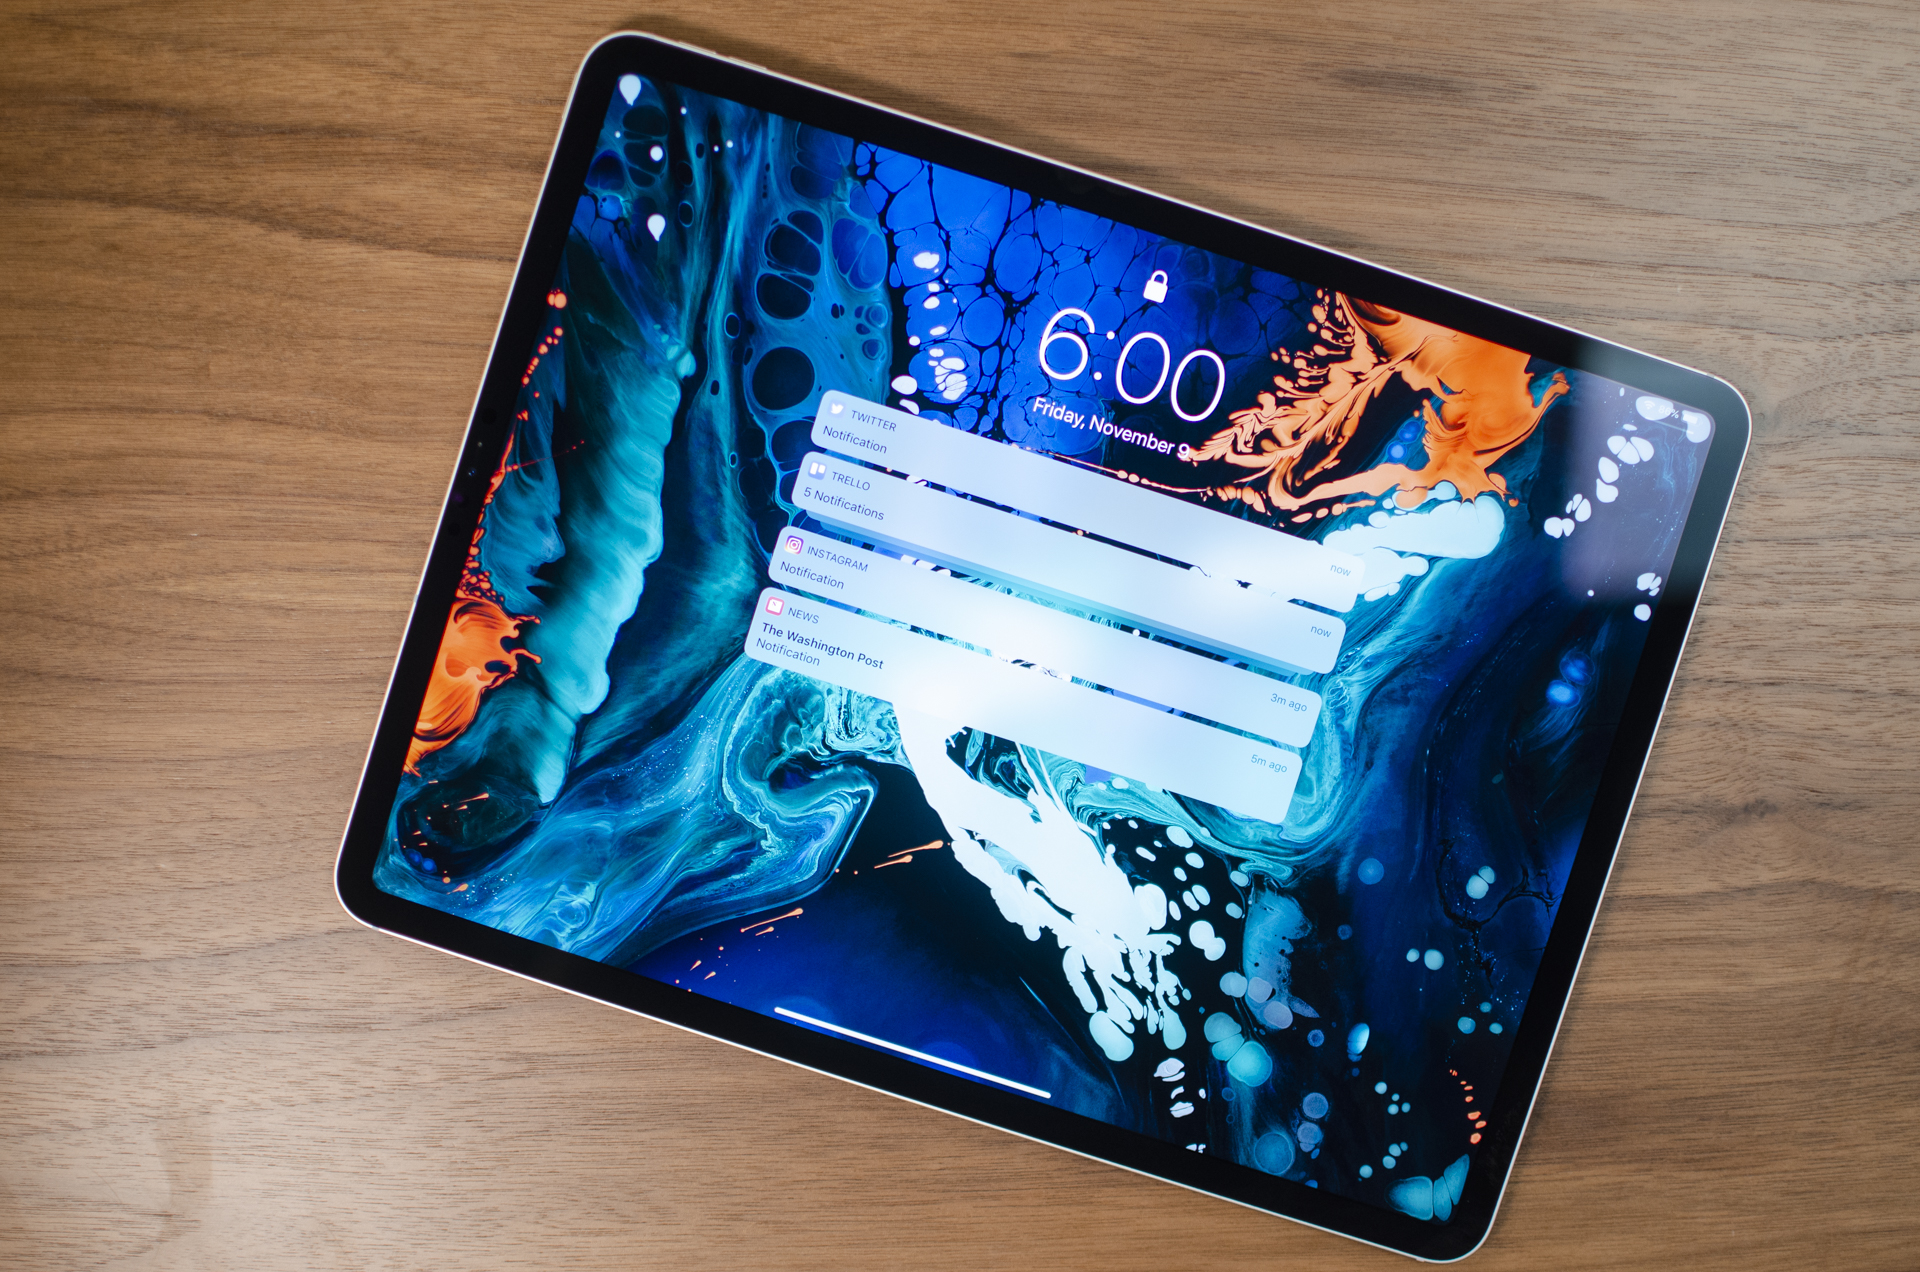 iPad Pro (2018) Review: The Best Tablet Money Can Buy